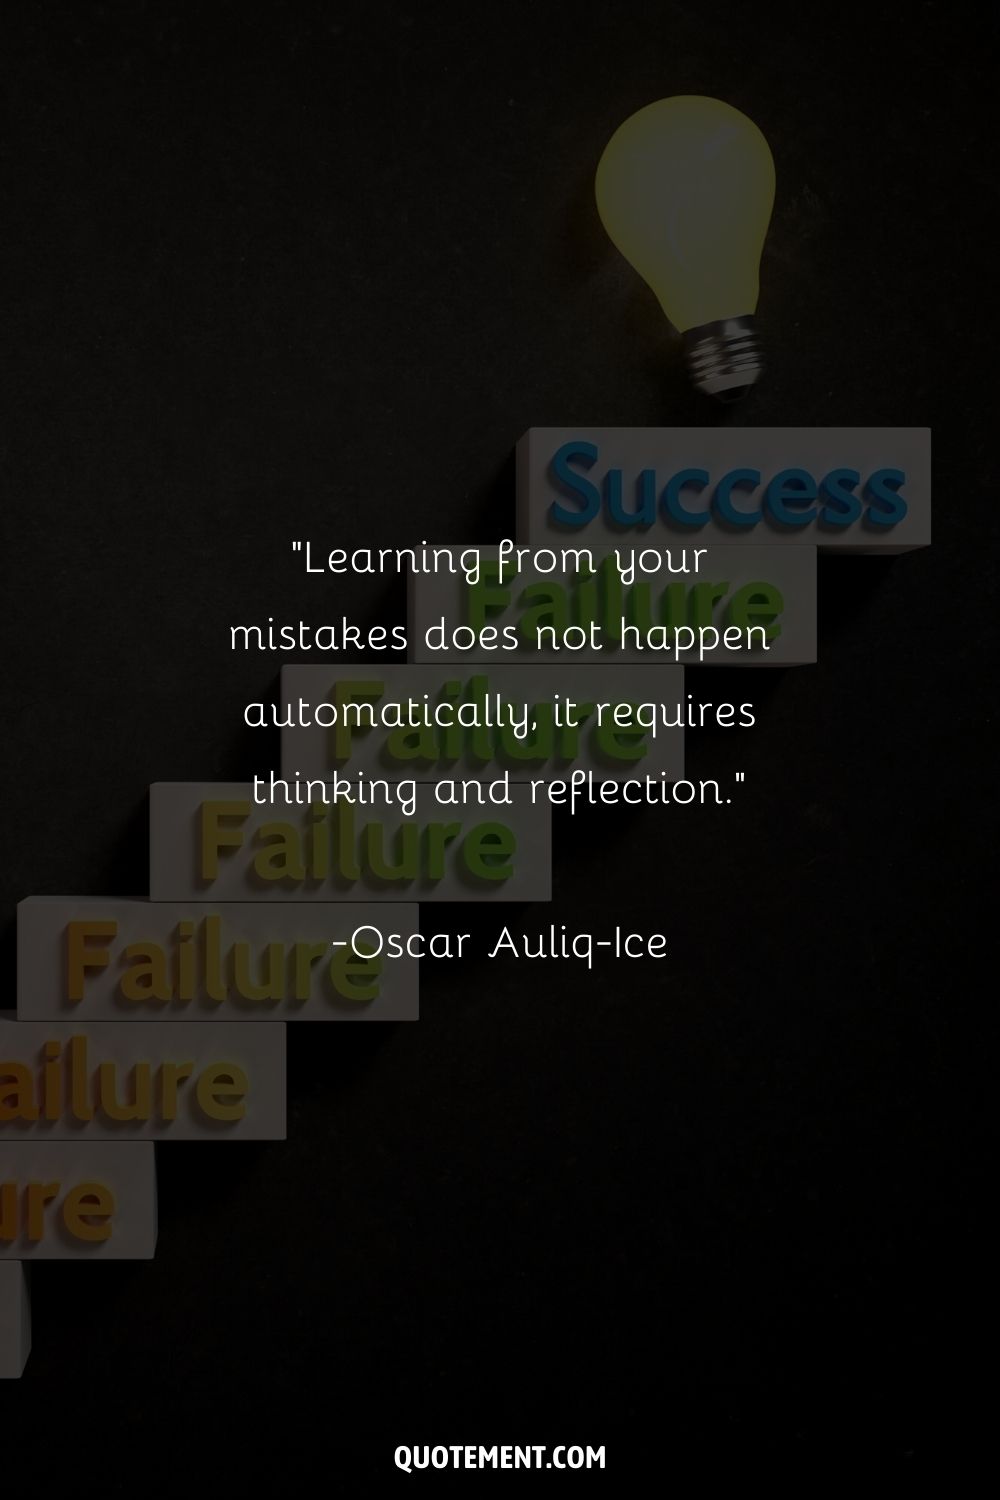 “Learning from your mistakes does not happen automatically, it requires thinking and reflection.” ― Oscar Auliq-Ice